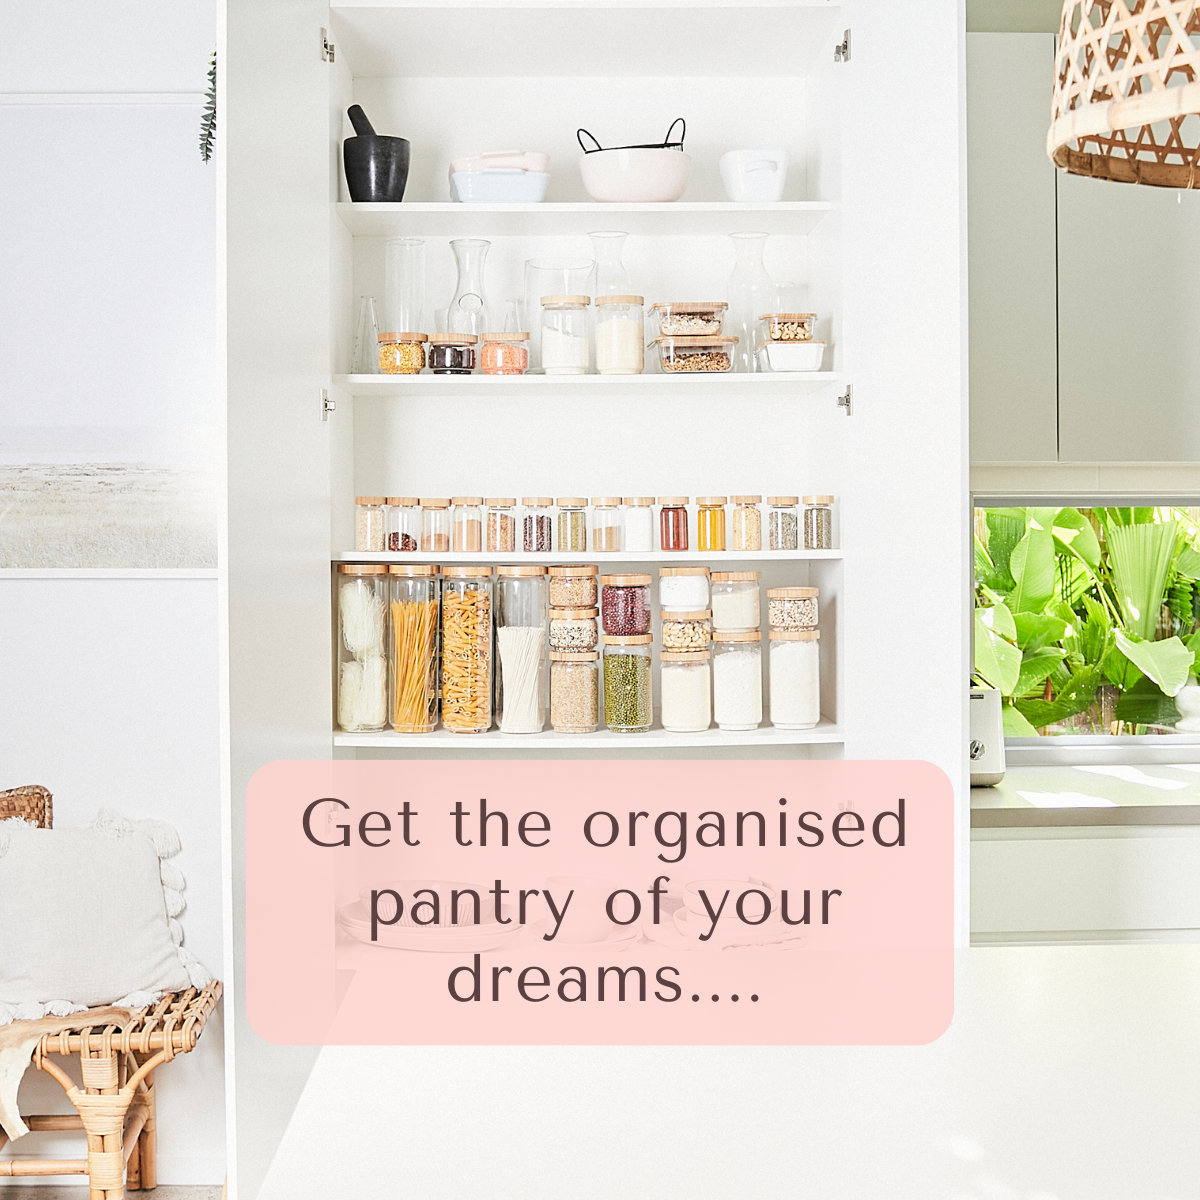 The ultimate pantry set (50pc)